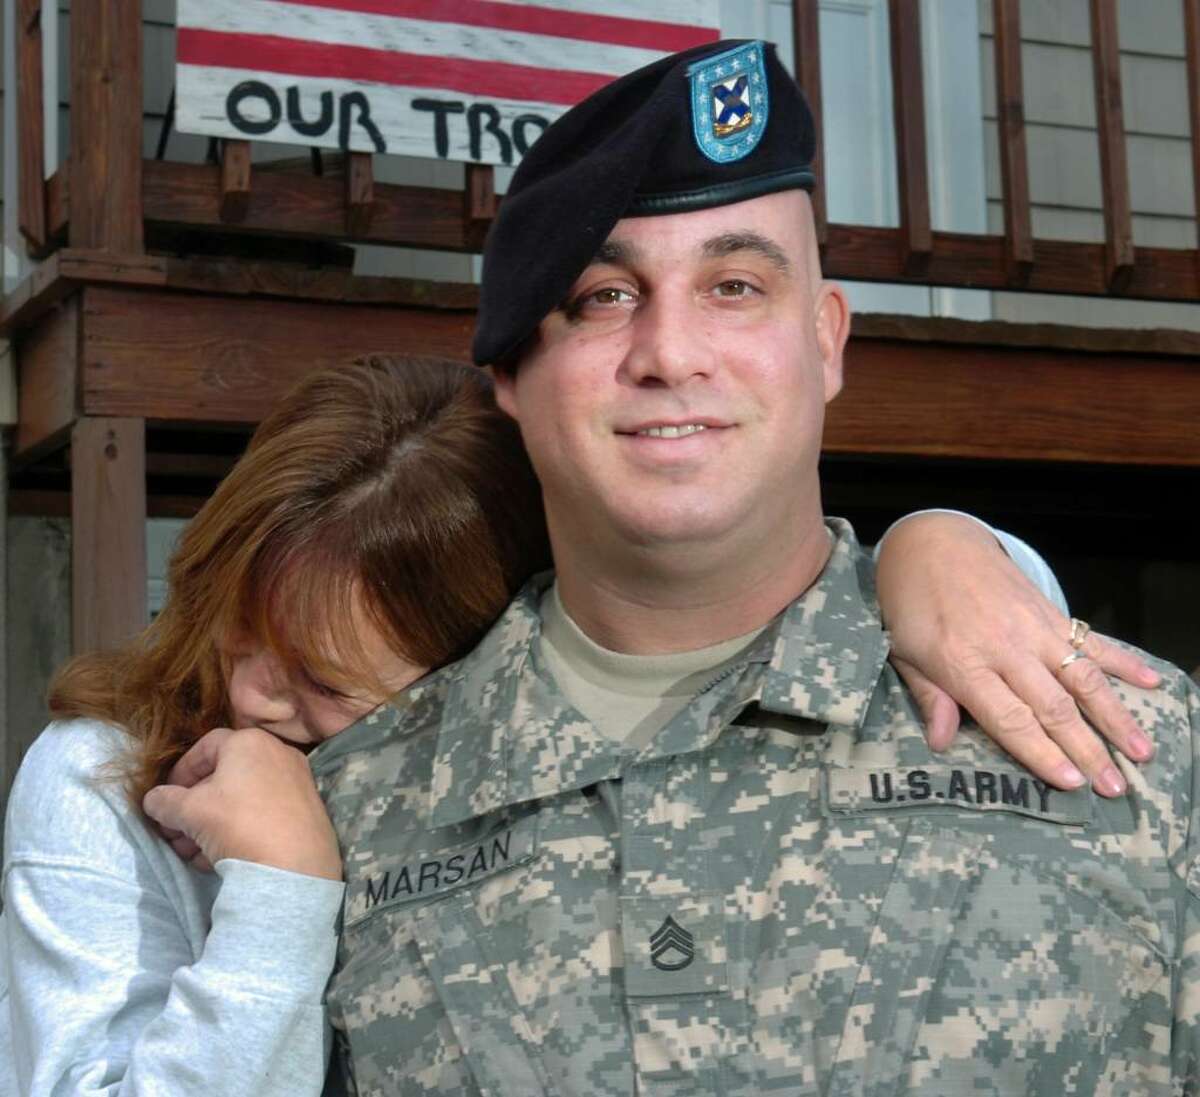 Staff Sgt. Nick Marson of the Connecticut Army National Guard gets a hug from his mother, Debbie, in front on their faimily home in Fairfield, Conn. on Nov. 6th, 2009. Marsan will deploy to Afghanistan with the 102nd Infintry later this month.